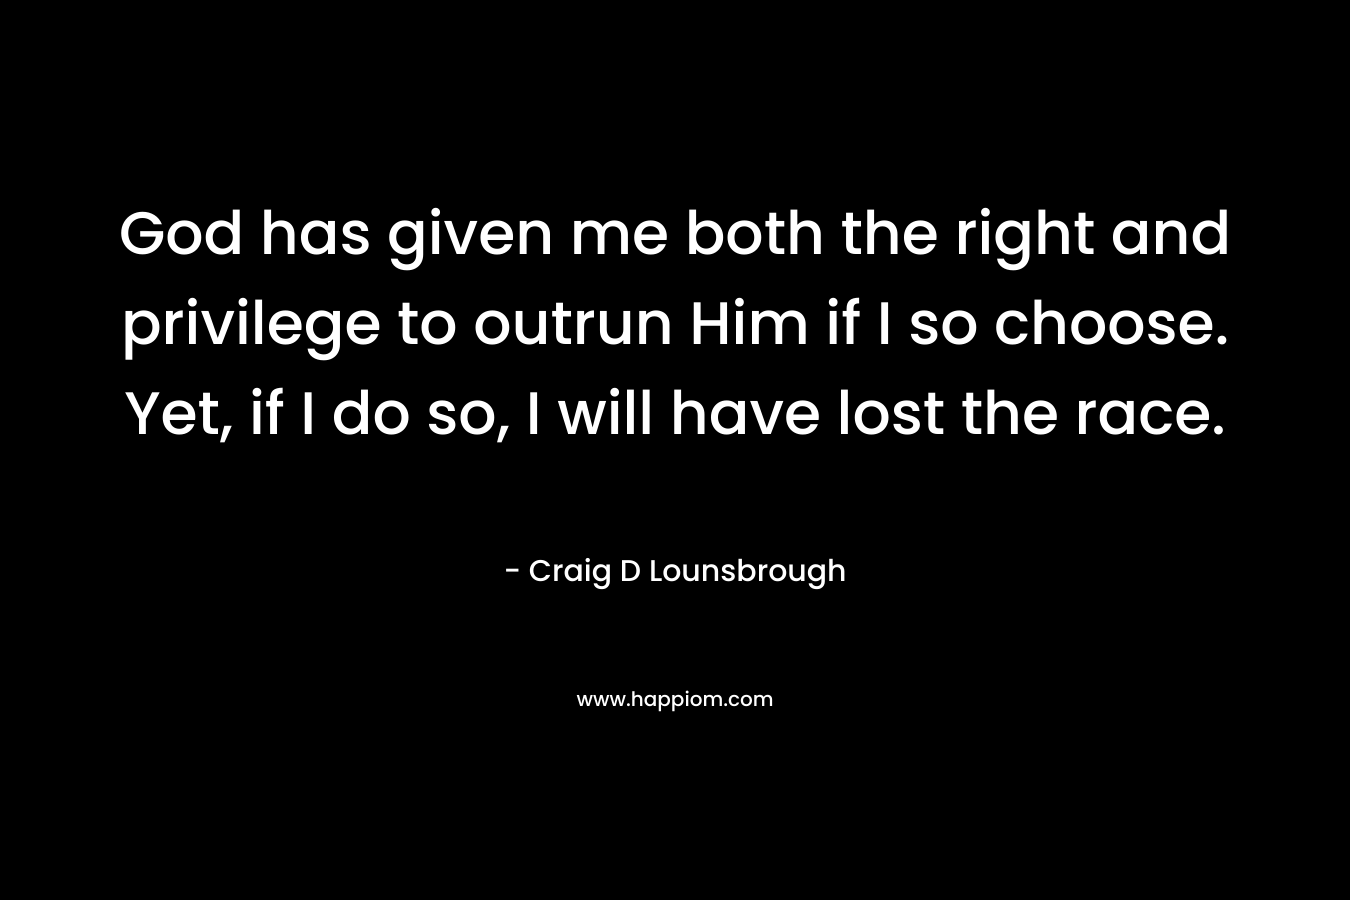 God has given me both the right and privilege to outrun Him if I so choose. Yet, if I do so, I will have lost the race.